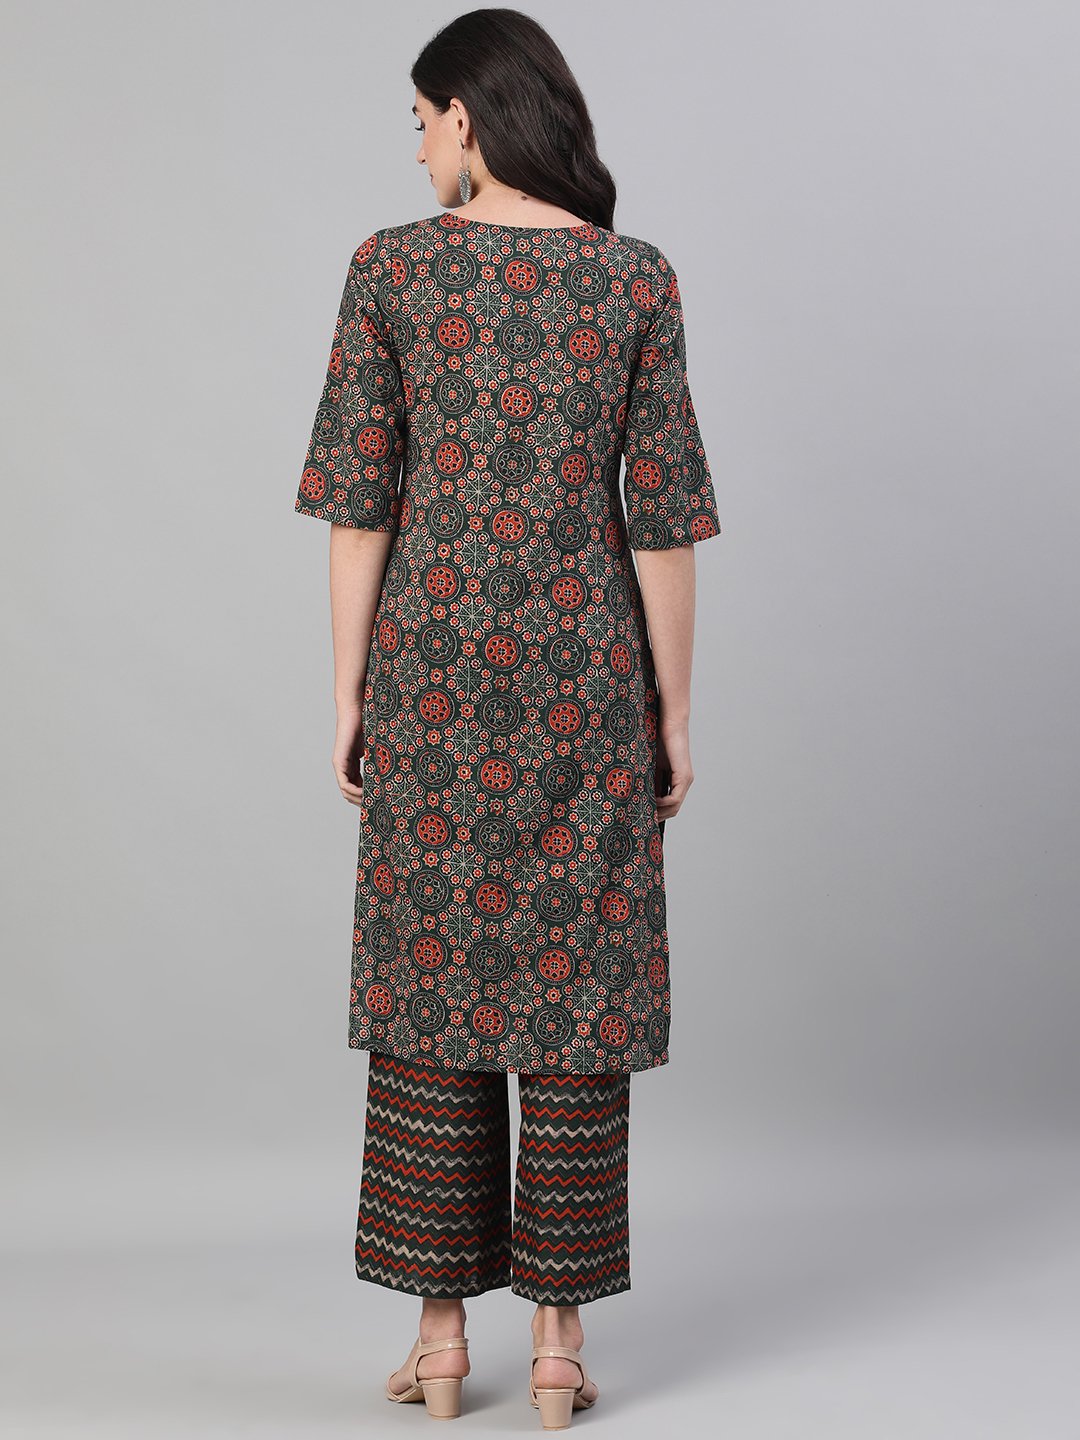 Women's Green And Orange Three-Quarter Sleeves Straight Kurta With Palazzo With Pockets And Face Mask - Nayo Clothing